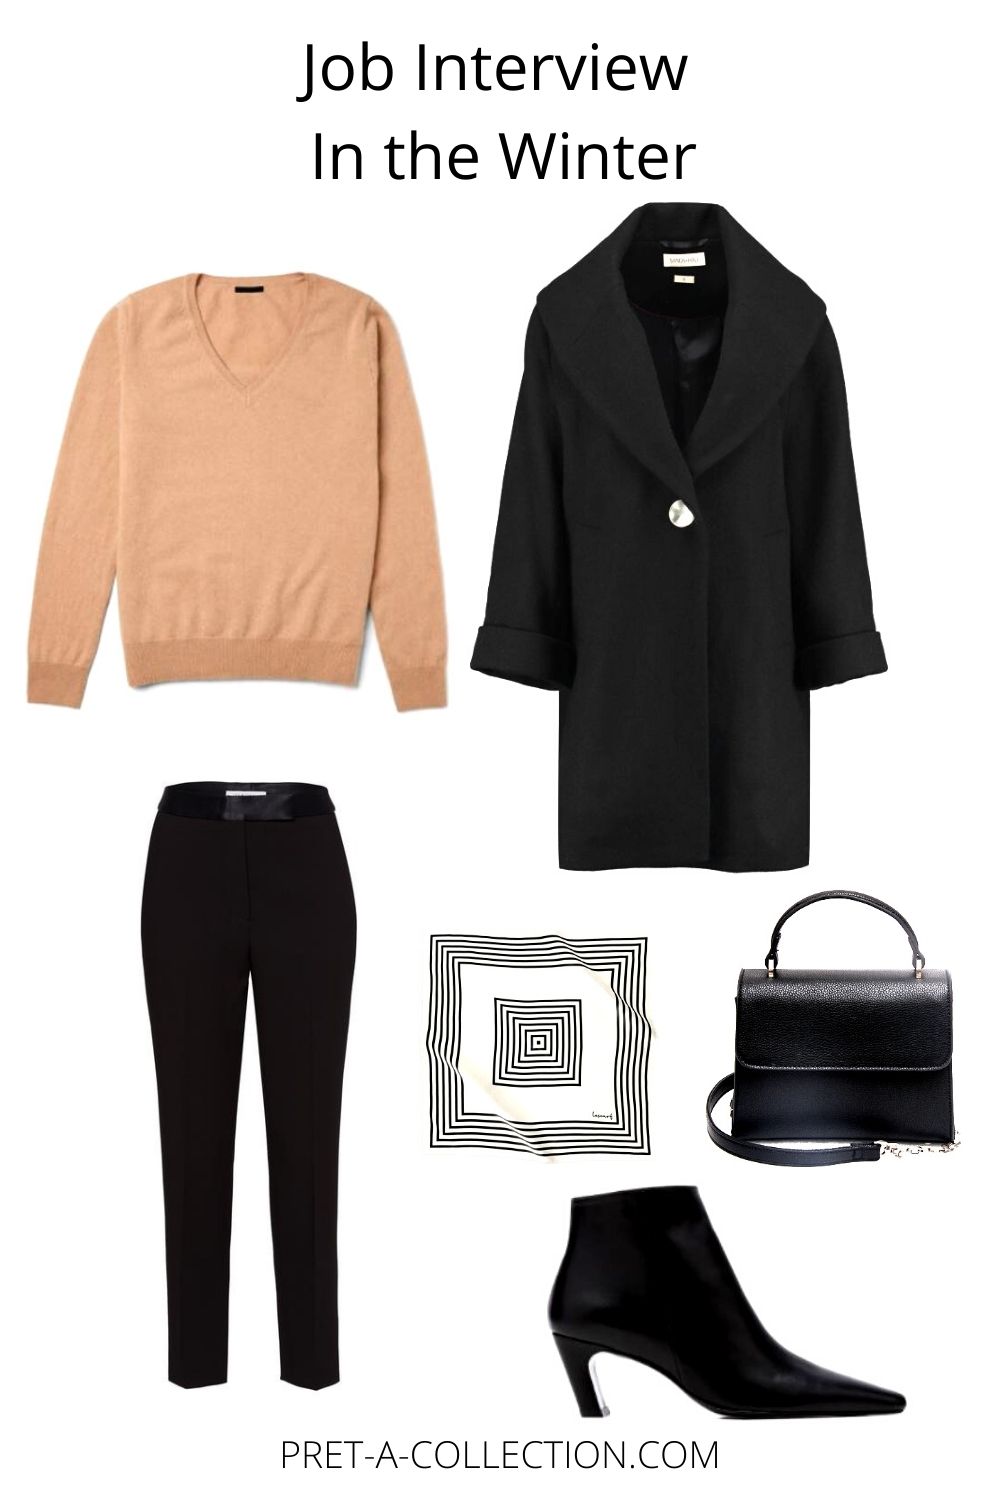 What To Wear For a Job Interview In The Winter - Pret a Collection